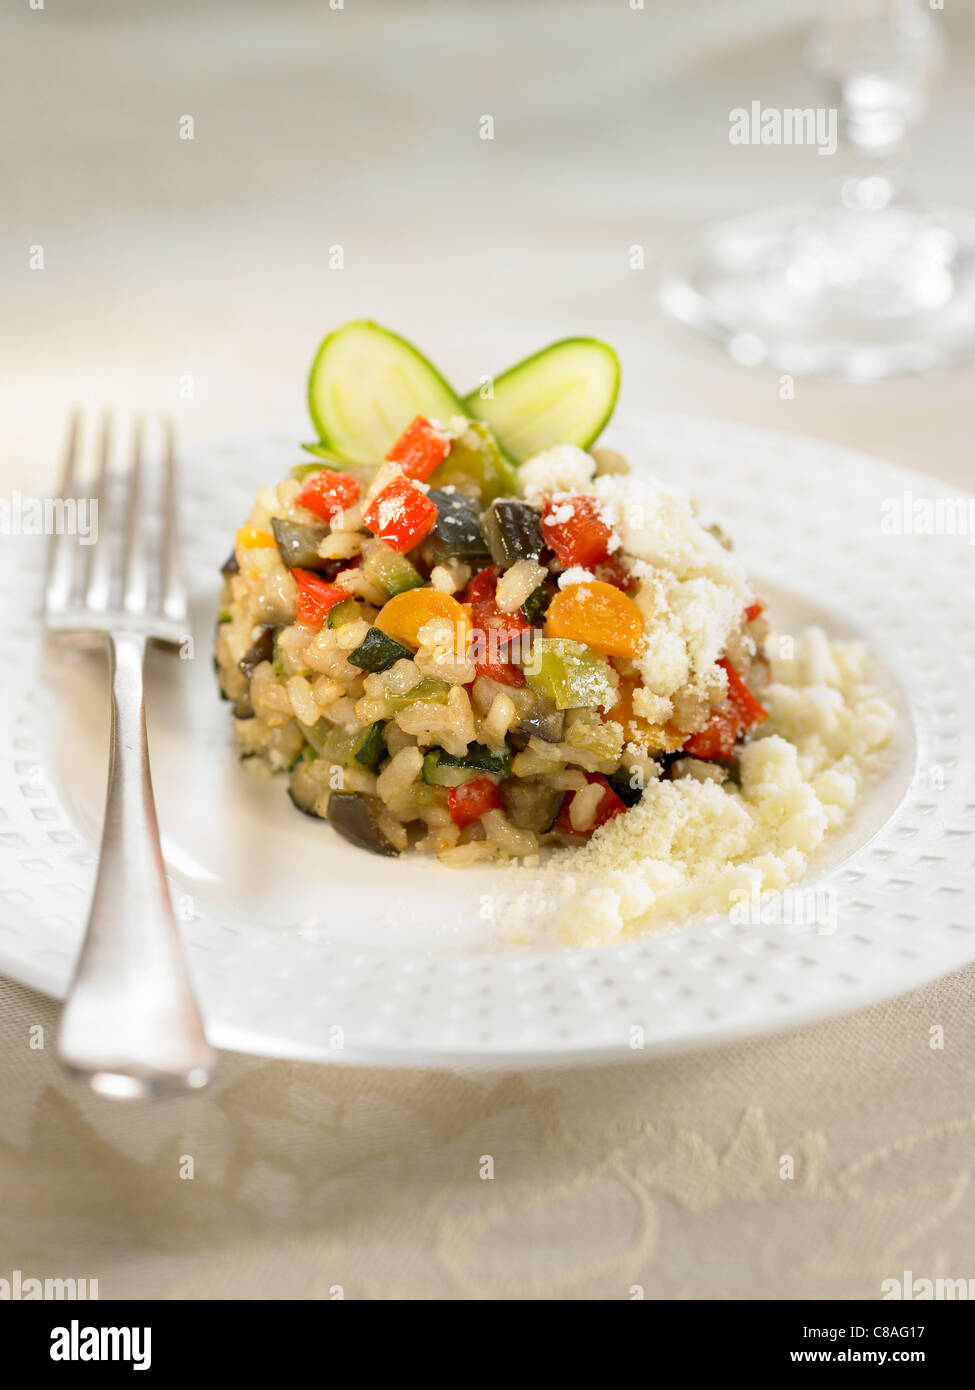 Wholemeal risotto Stock Photo